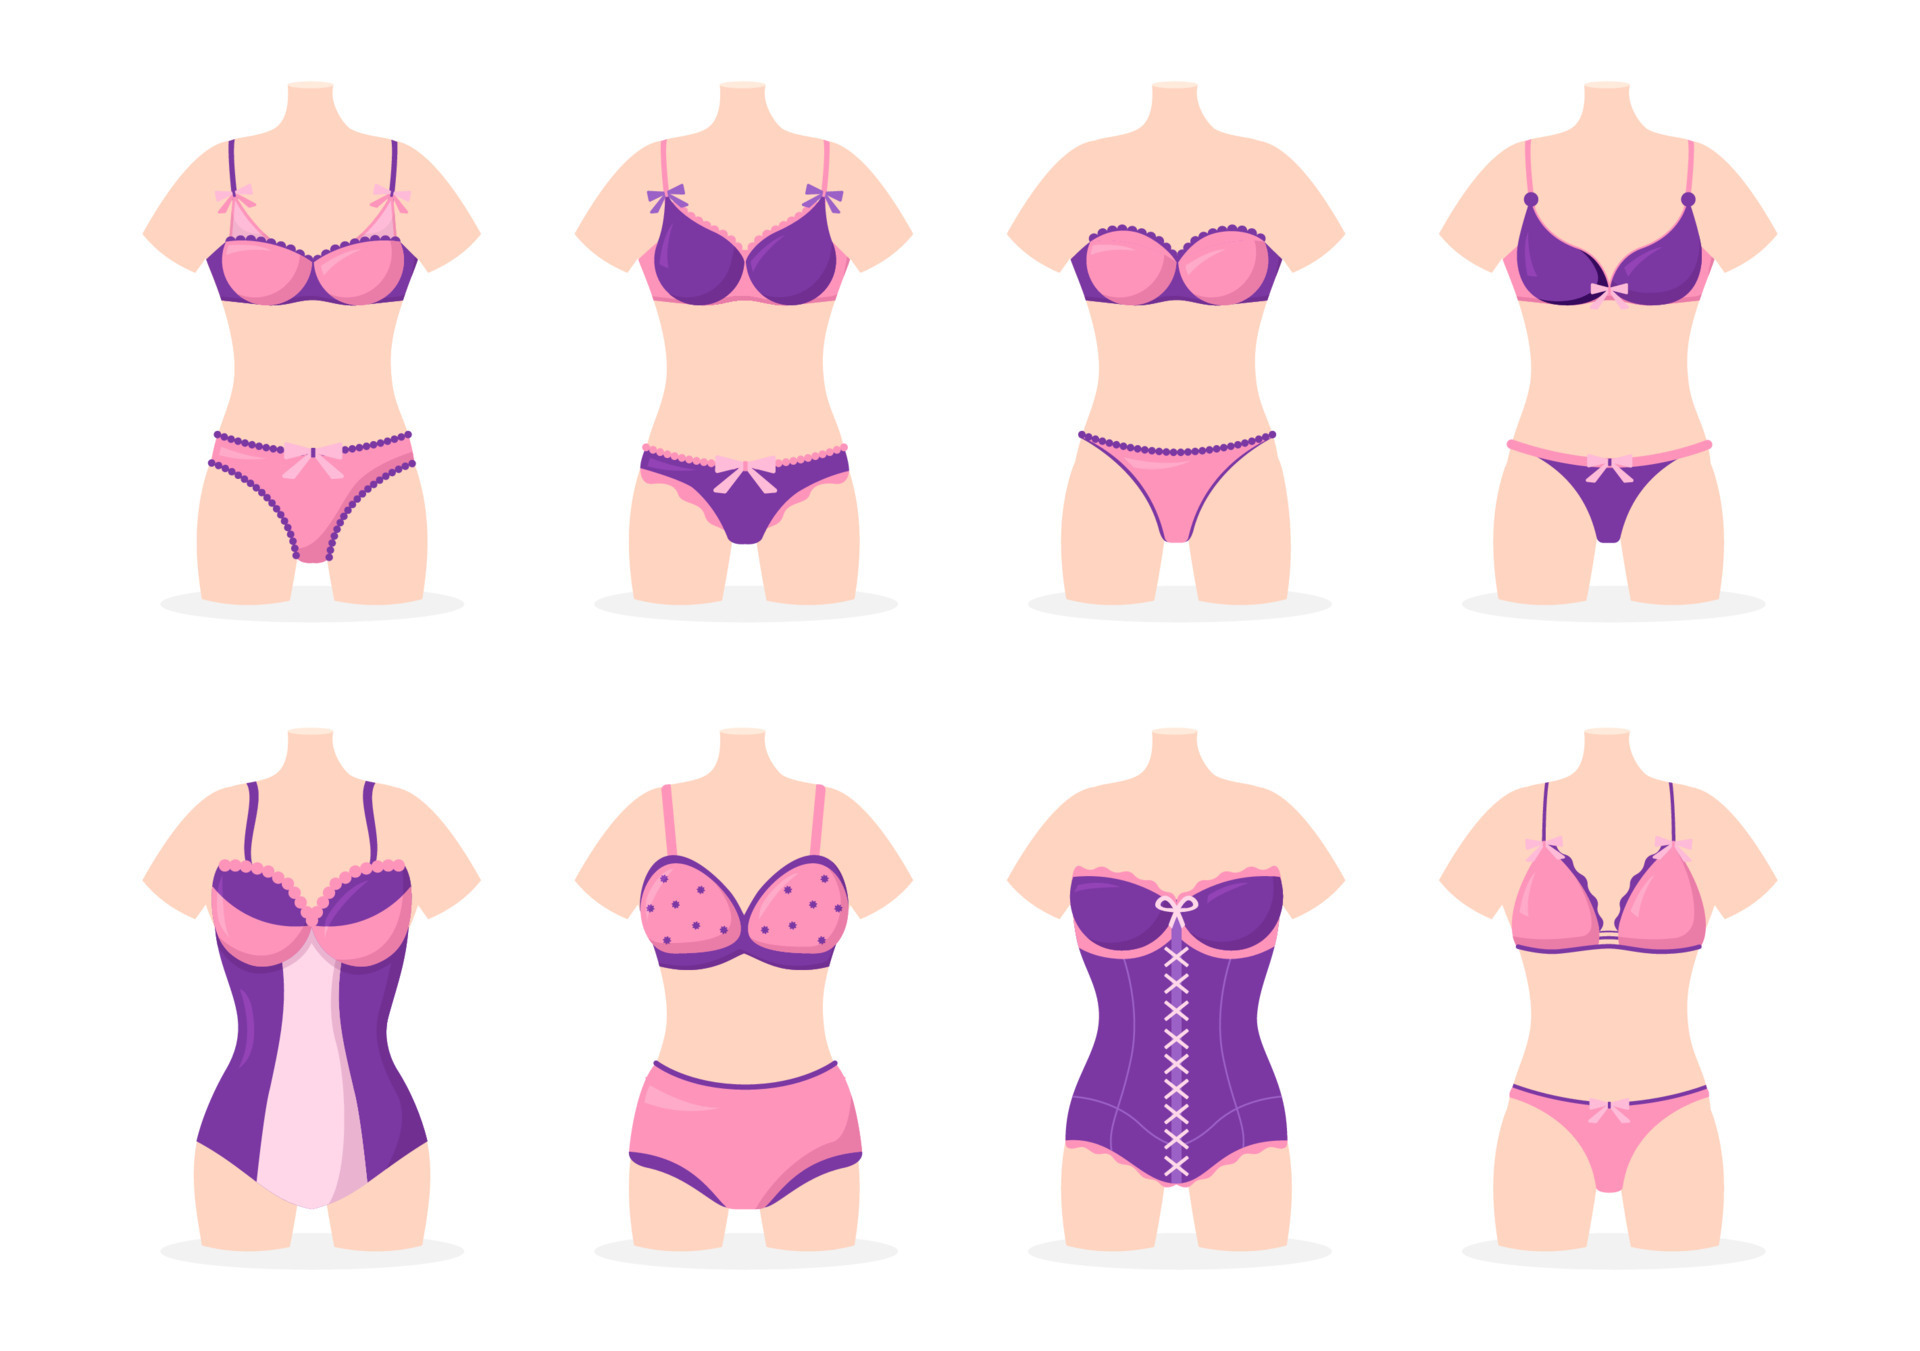 Cartooon Woman Wear Underwear Has Different Cup Size Royalty Free SVG,  Cliparts, Vectors, and Stock Illustration. Image 69401702.